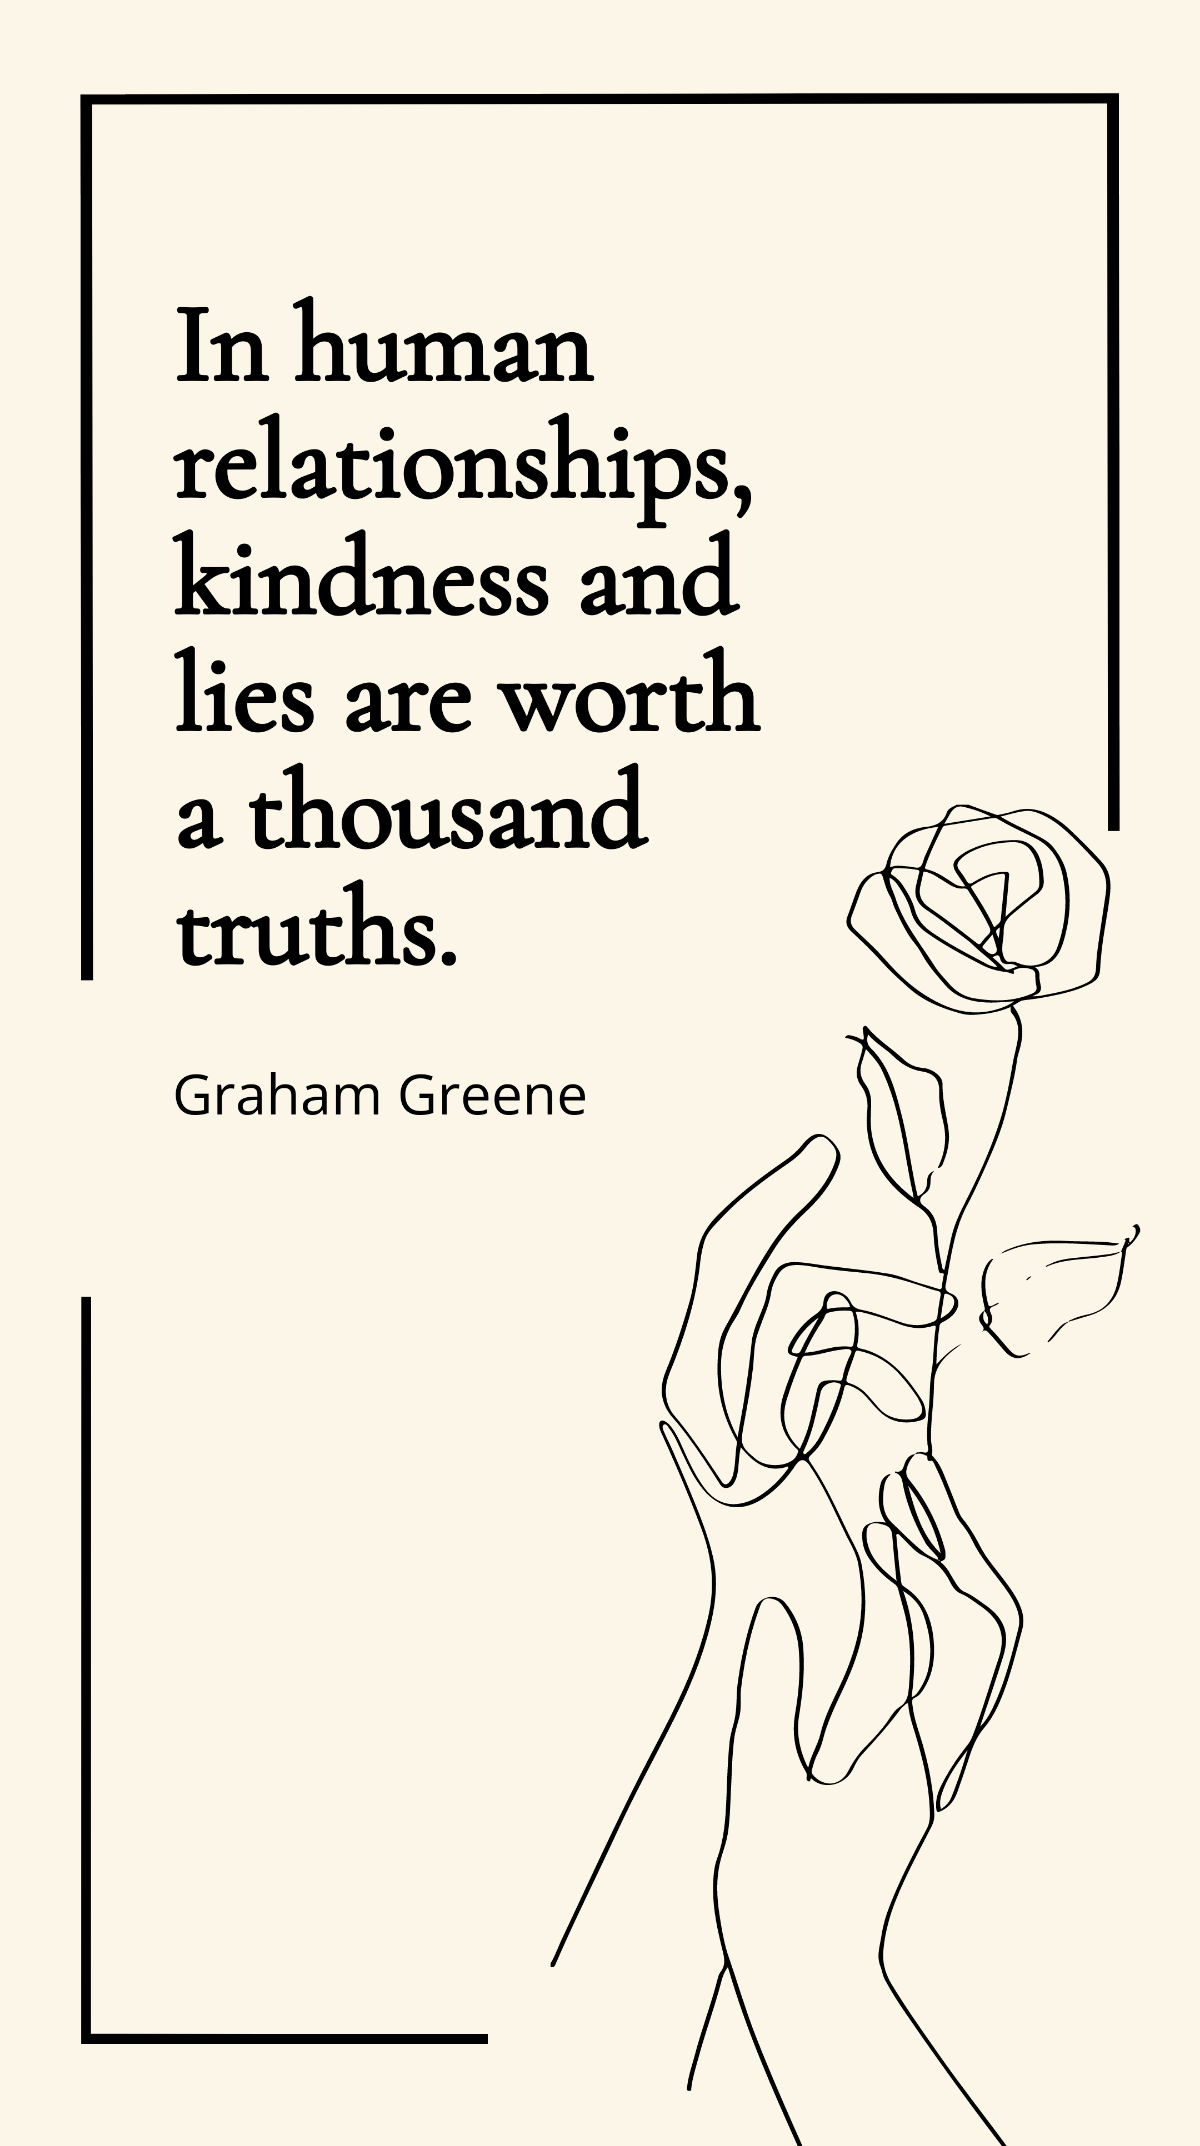 Graham Greene - In human relationships, kindness and lies are worth a thousand truths. Template